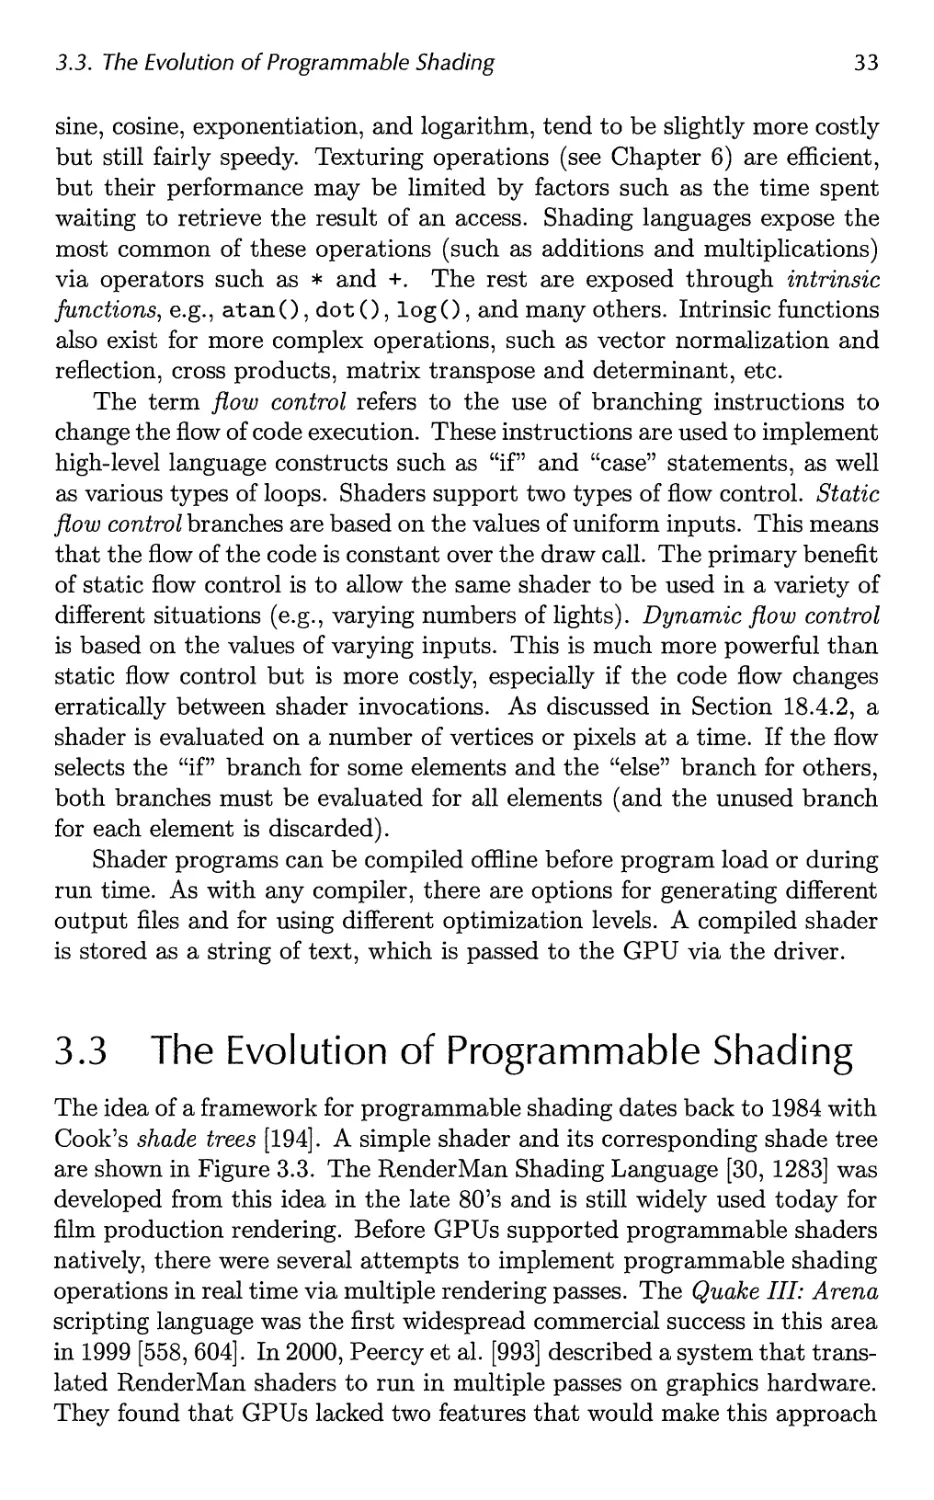 3.3 The Evolution of Programmable Shading